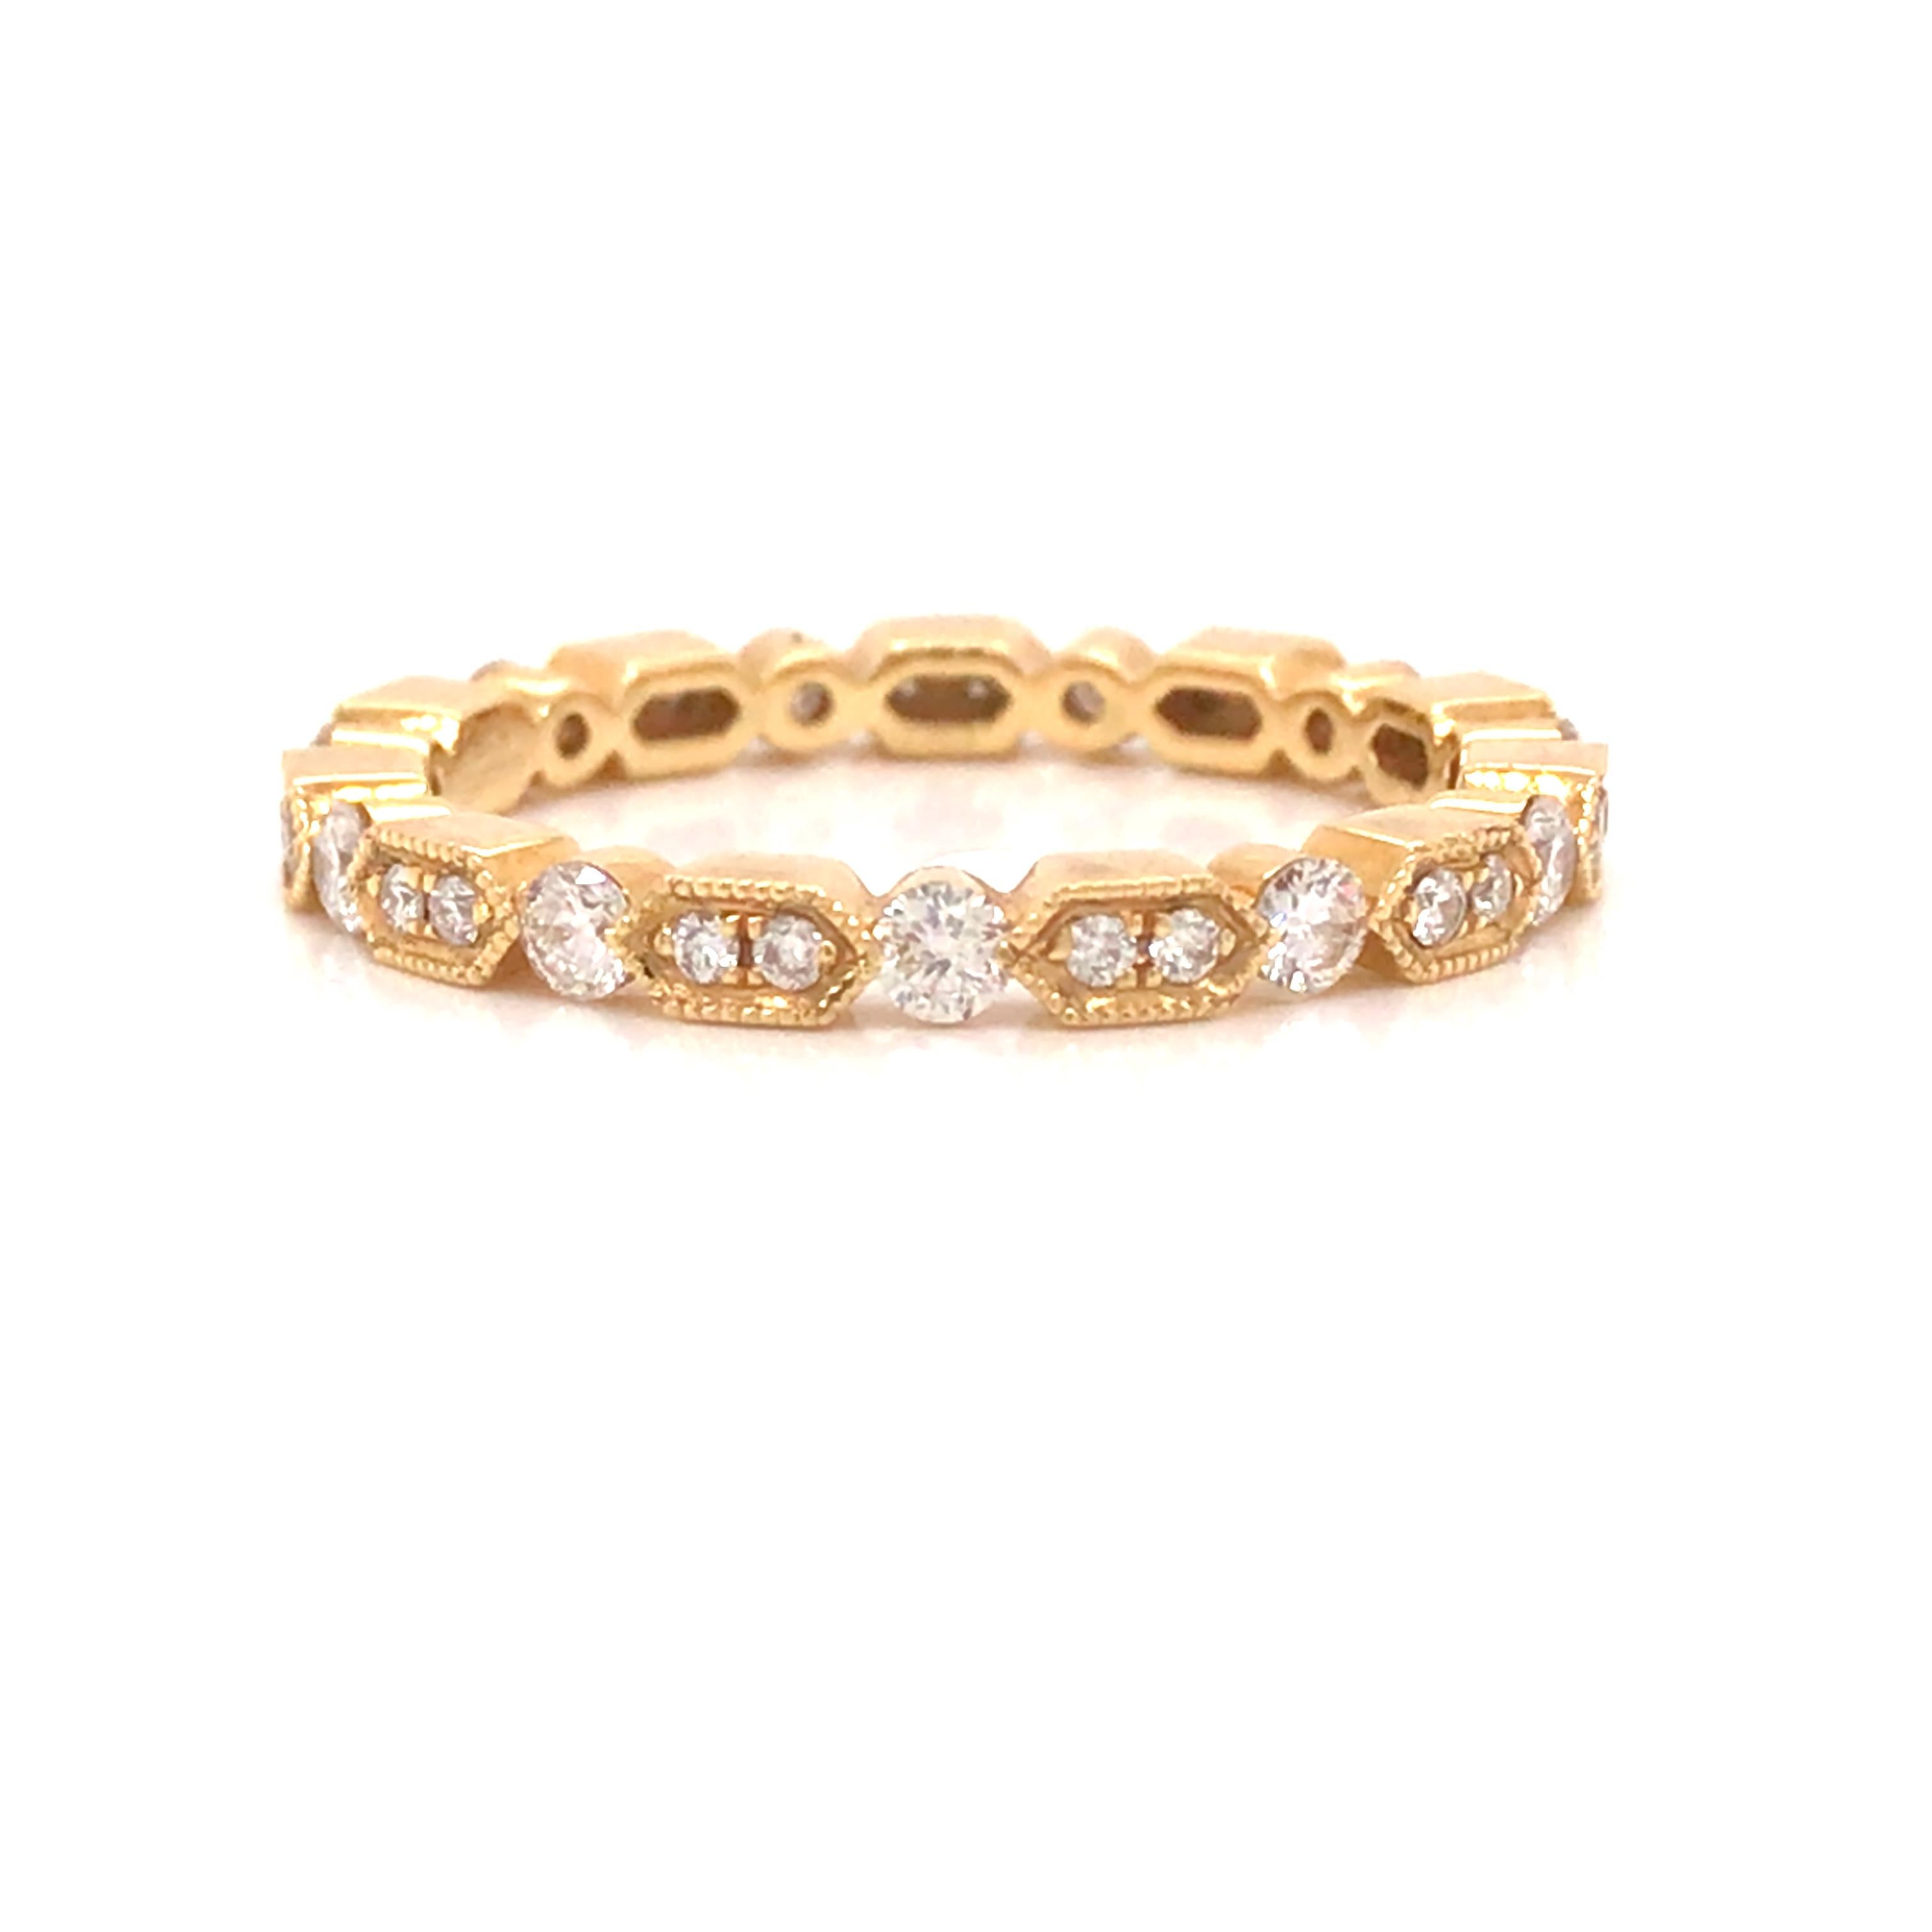 Diamond Miligrain Band in 18K Yellow Gold.  Round Brilliant Cut Diamonds weighing 0.56 carat total weight, G-H in color and VS-SI in clarity are expertly set.  The Ring measures 1/8 inch in width.  Ring size 6 1/2. 2.02 grams.